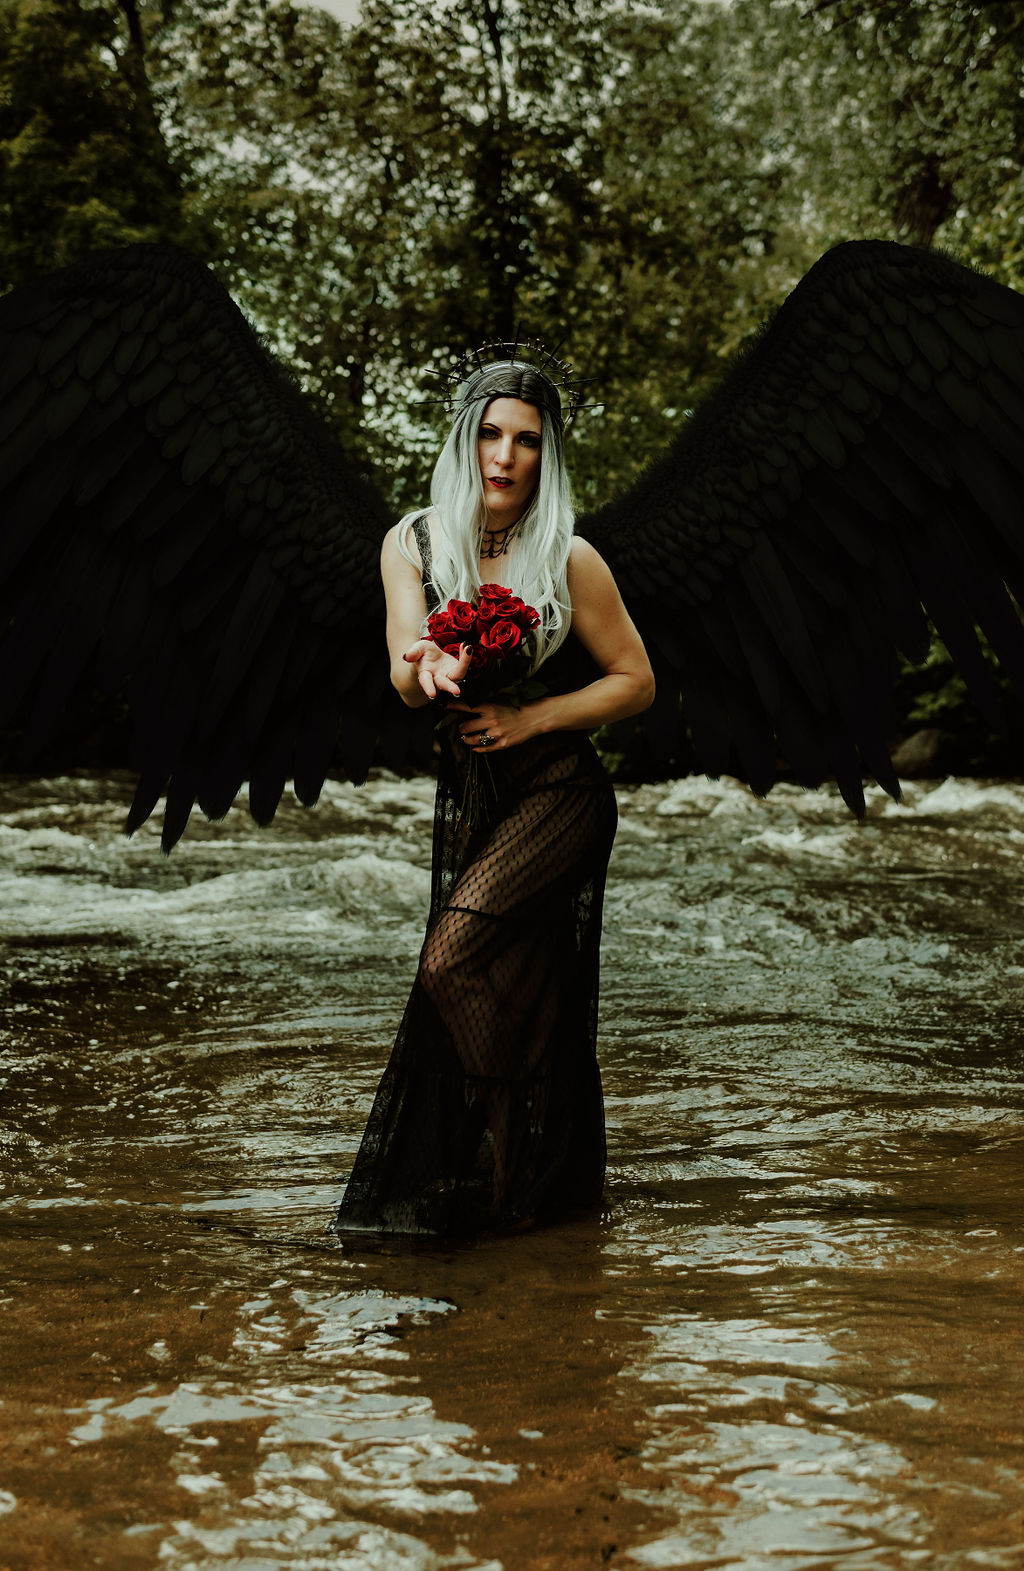 A woman with large black wings stands in a shallow river. The person is wearing a long black dress and holding a red rose.